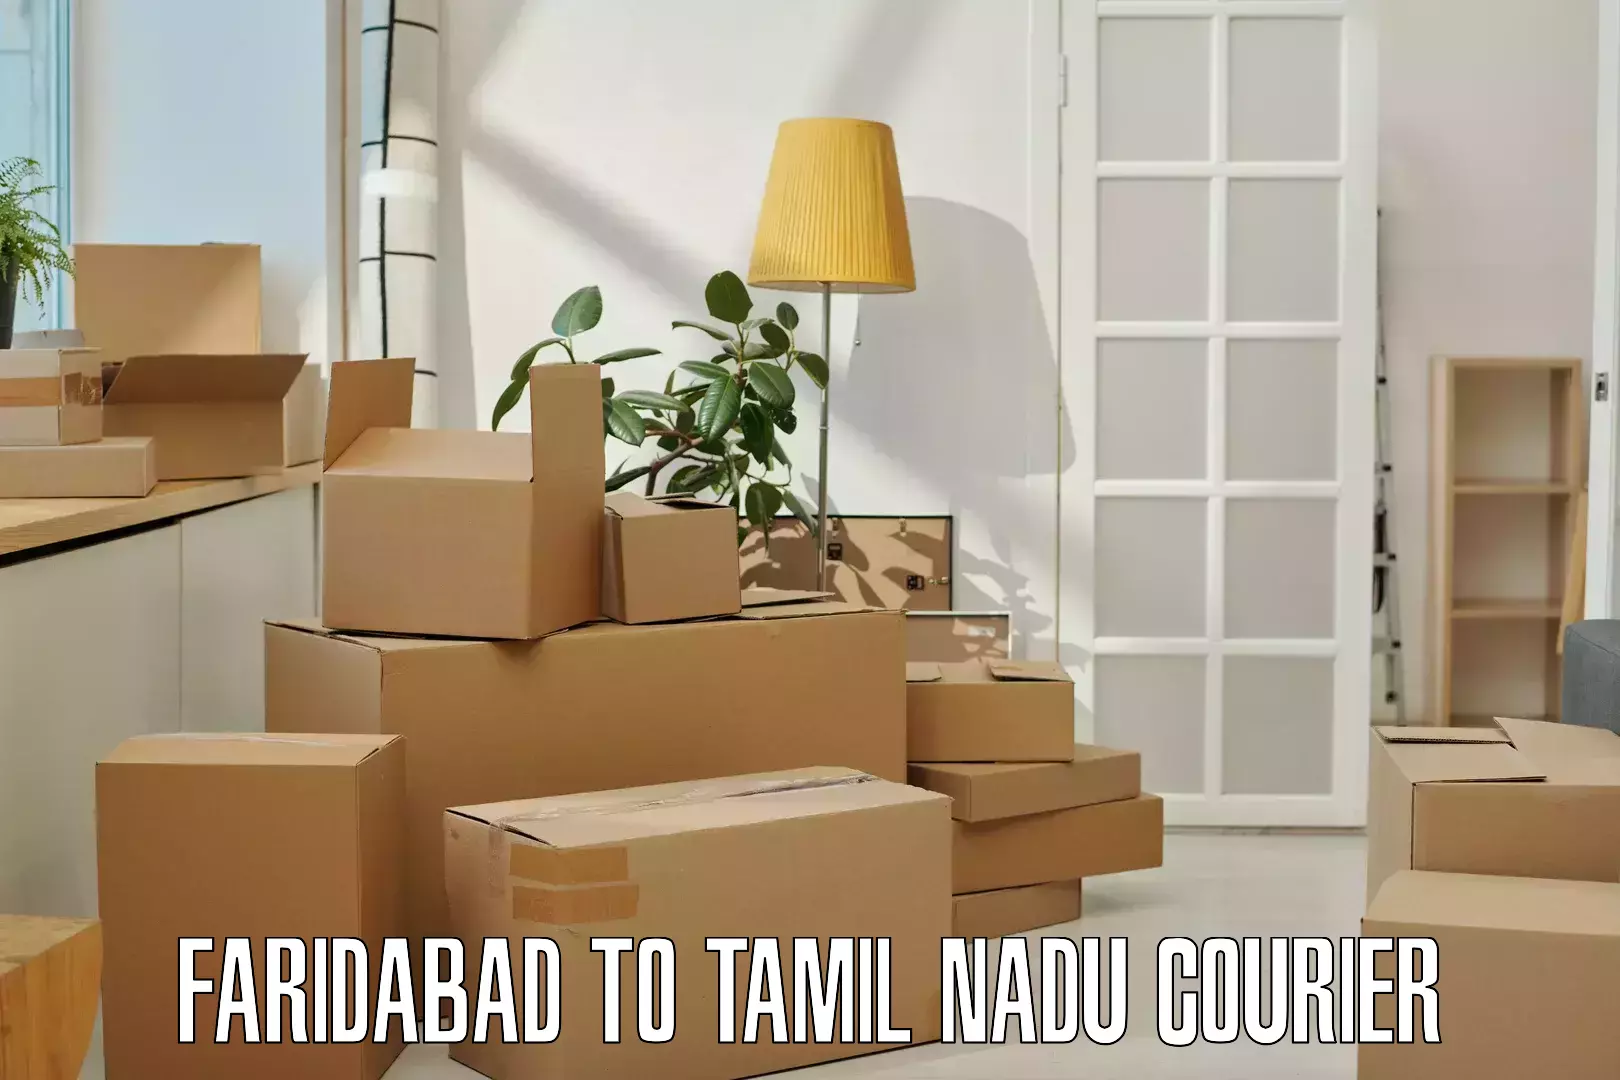 24-hour courier service Faridabad to Tamil Nadu